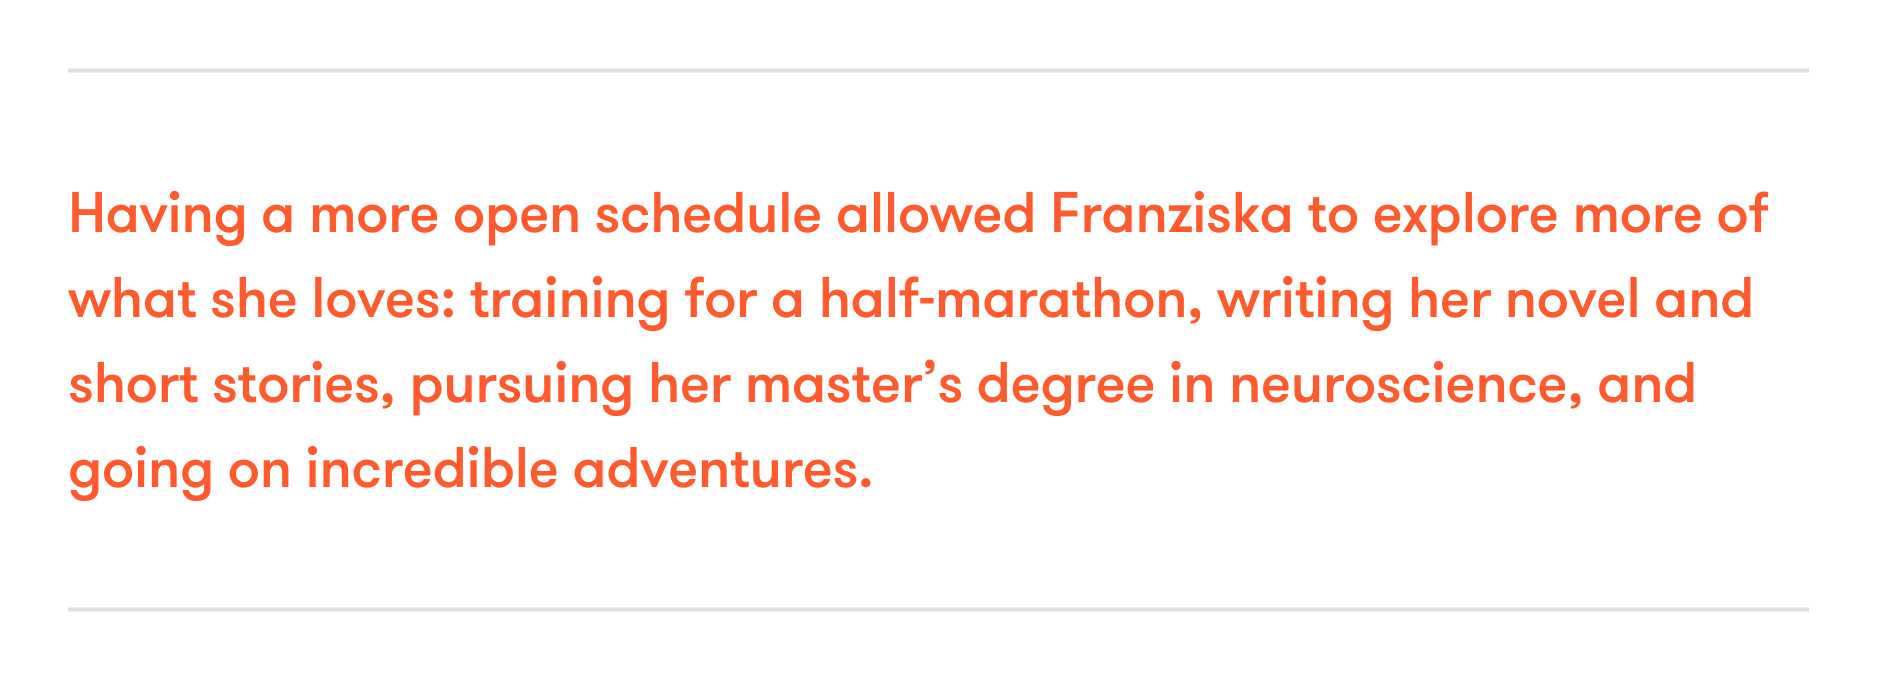 Quote that reads "Having a more open schedule allowed Franziska to explore more of what she loves: training for a half-marathon, writing her novel and short stories, pursuing her master's degree in neuroscience, and going on incredible adventures."